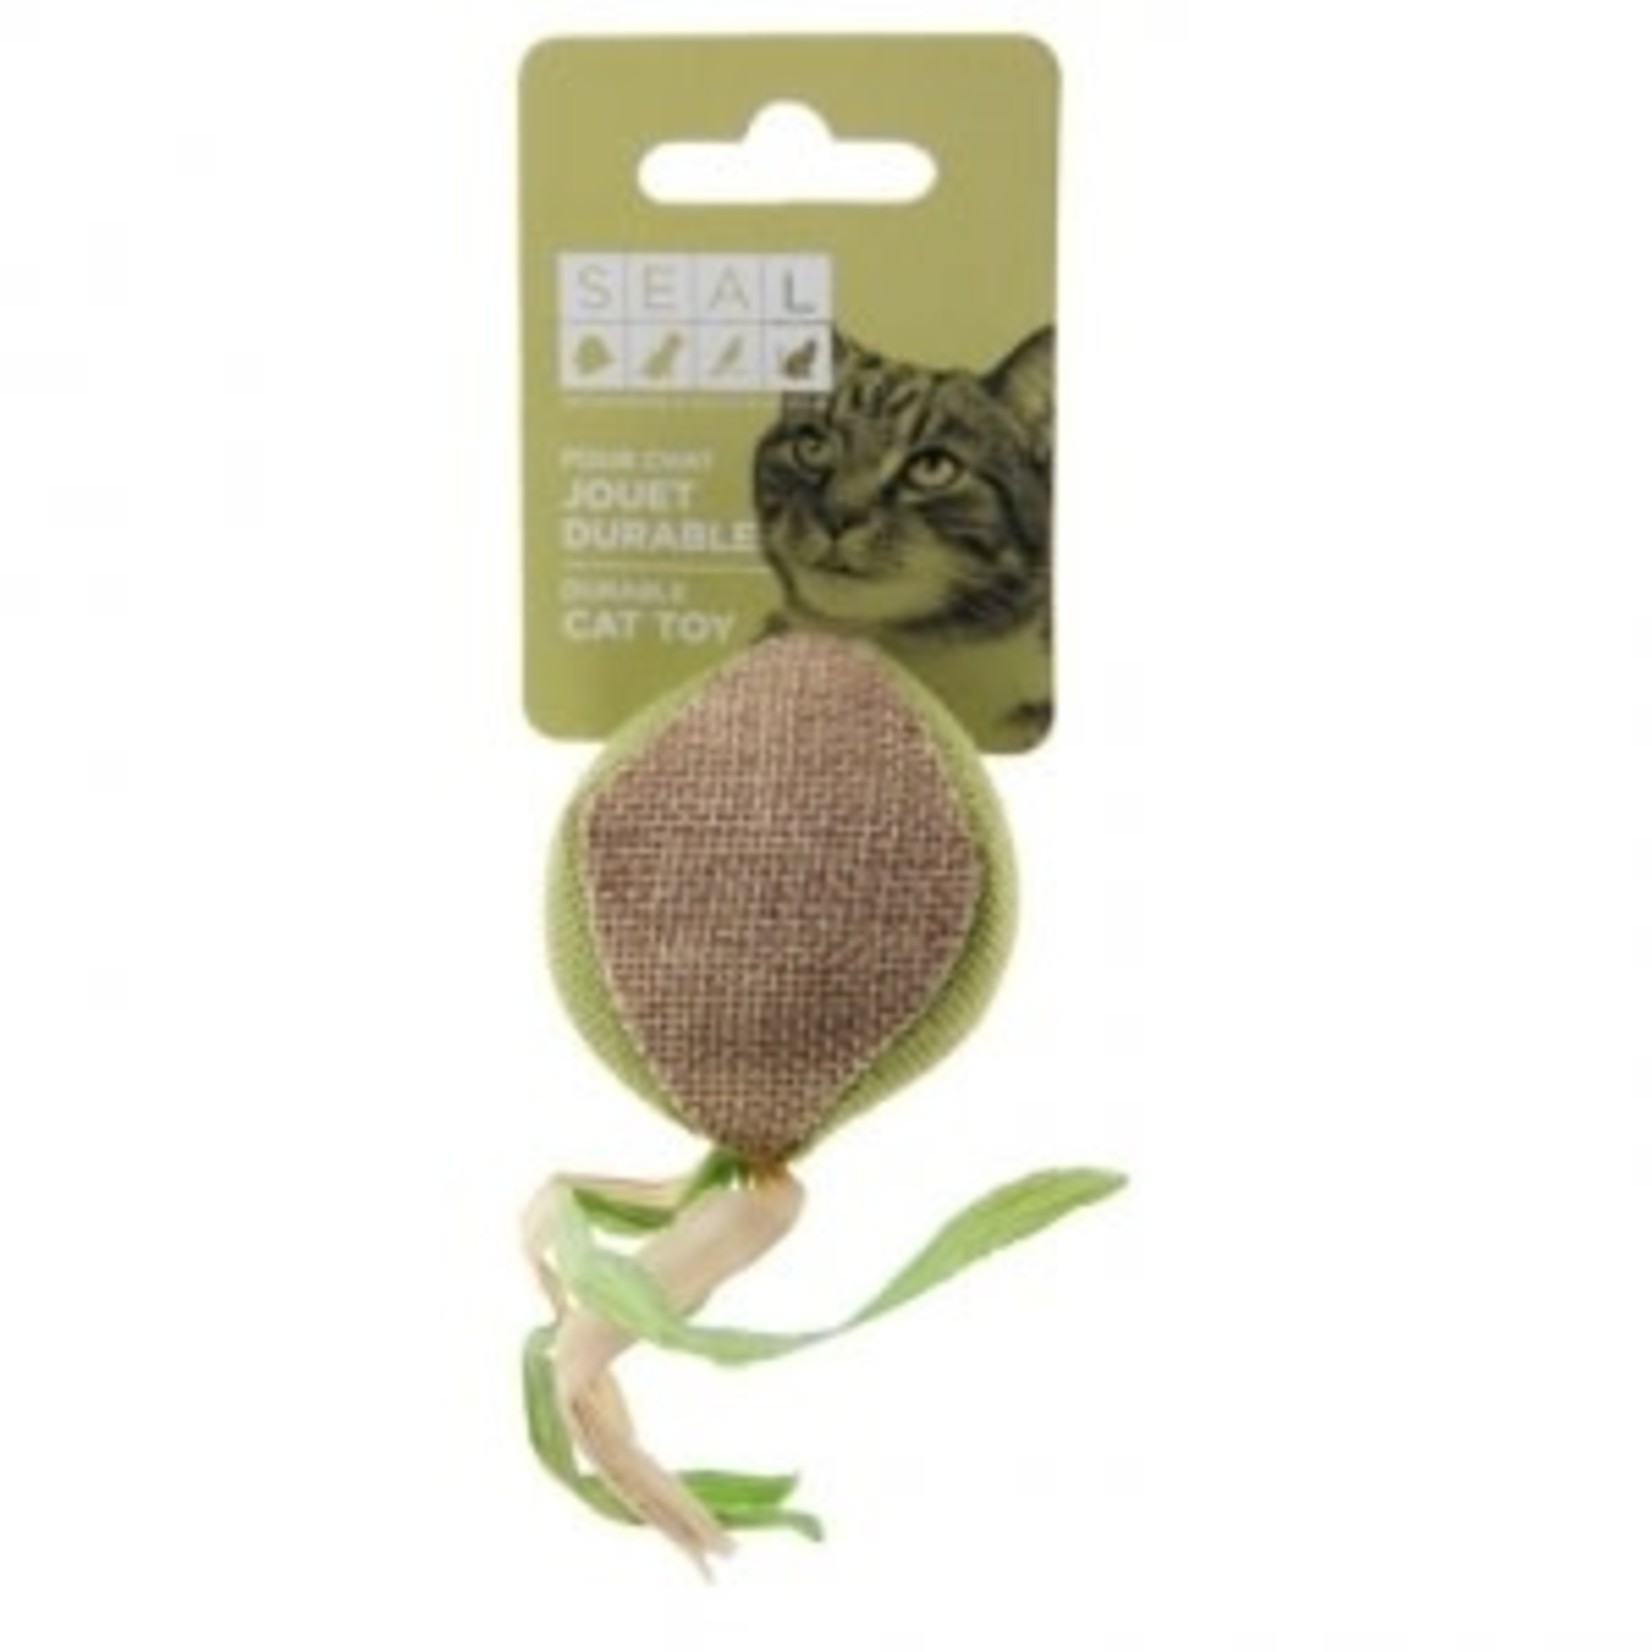 NATURAL BALL CAT TOY